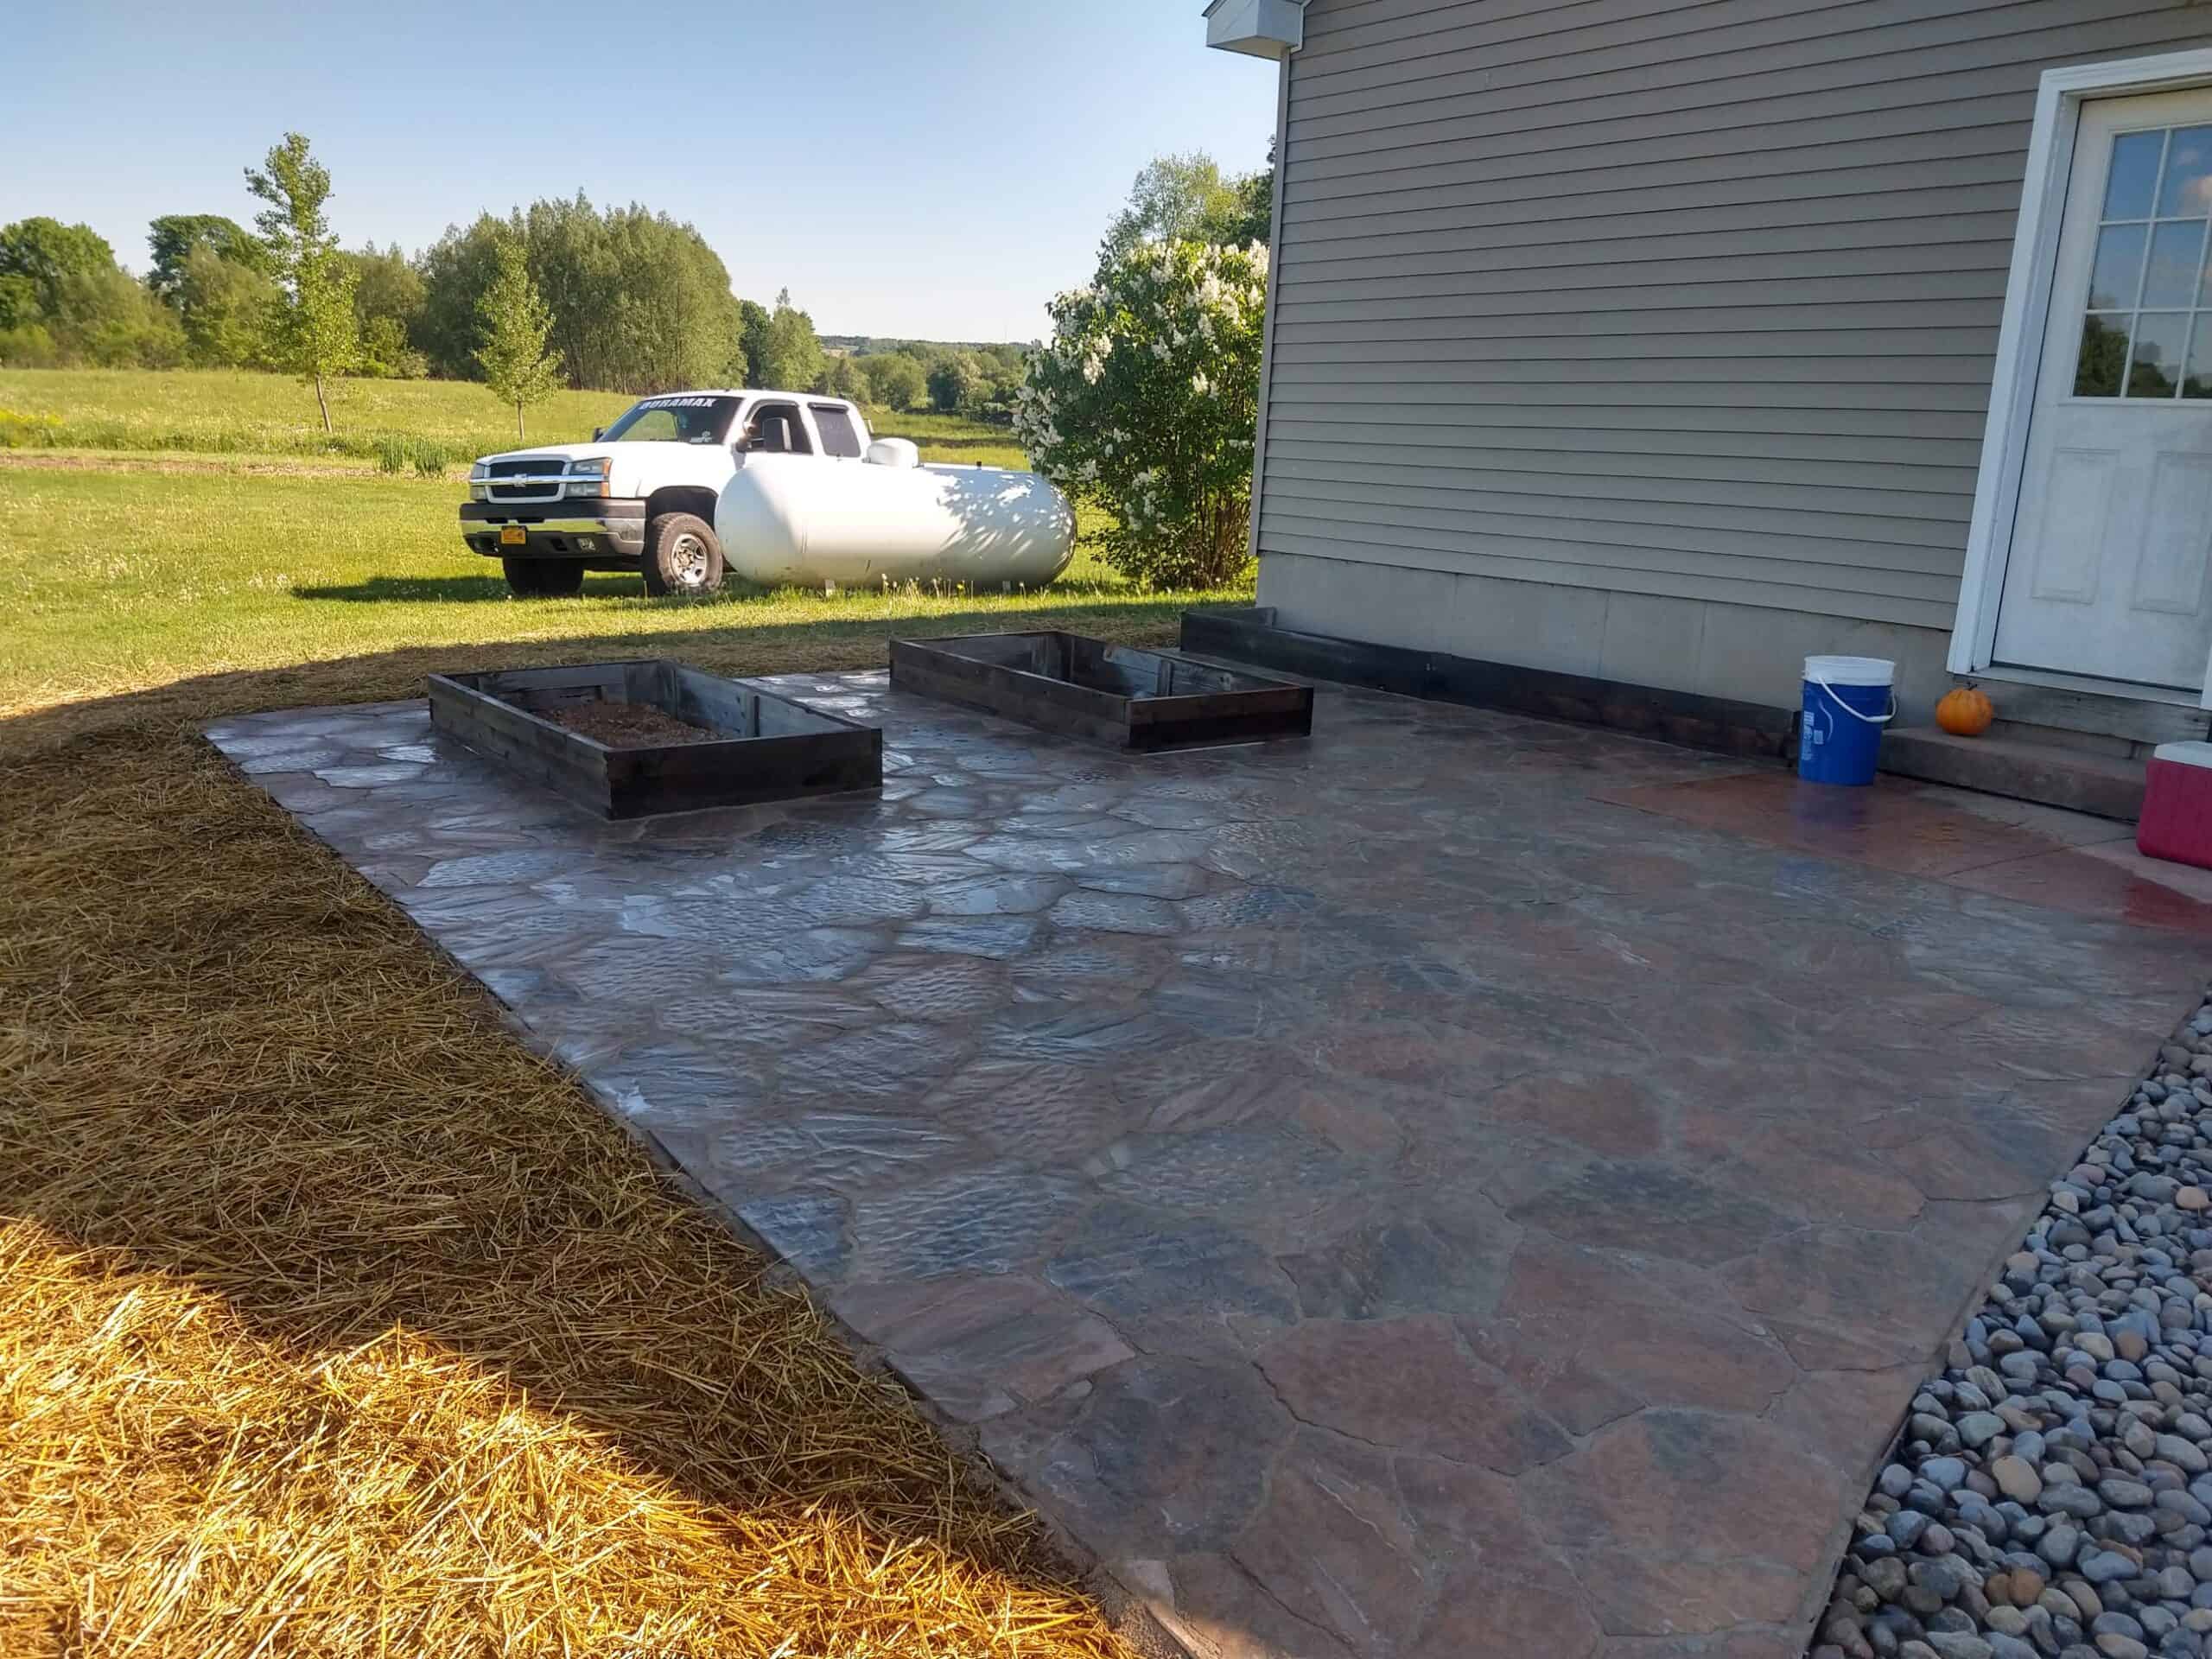 Schedule professional services to build practical and functional hardscapes